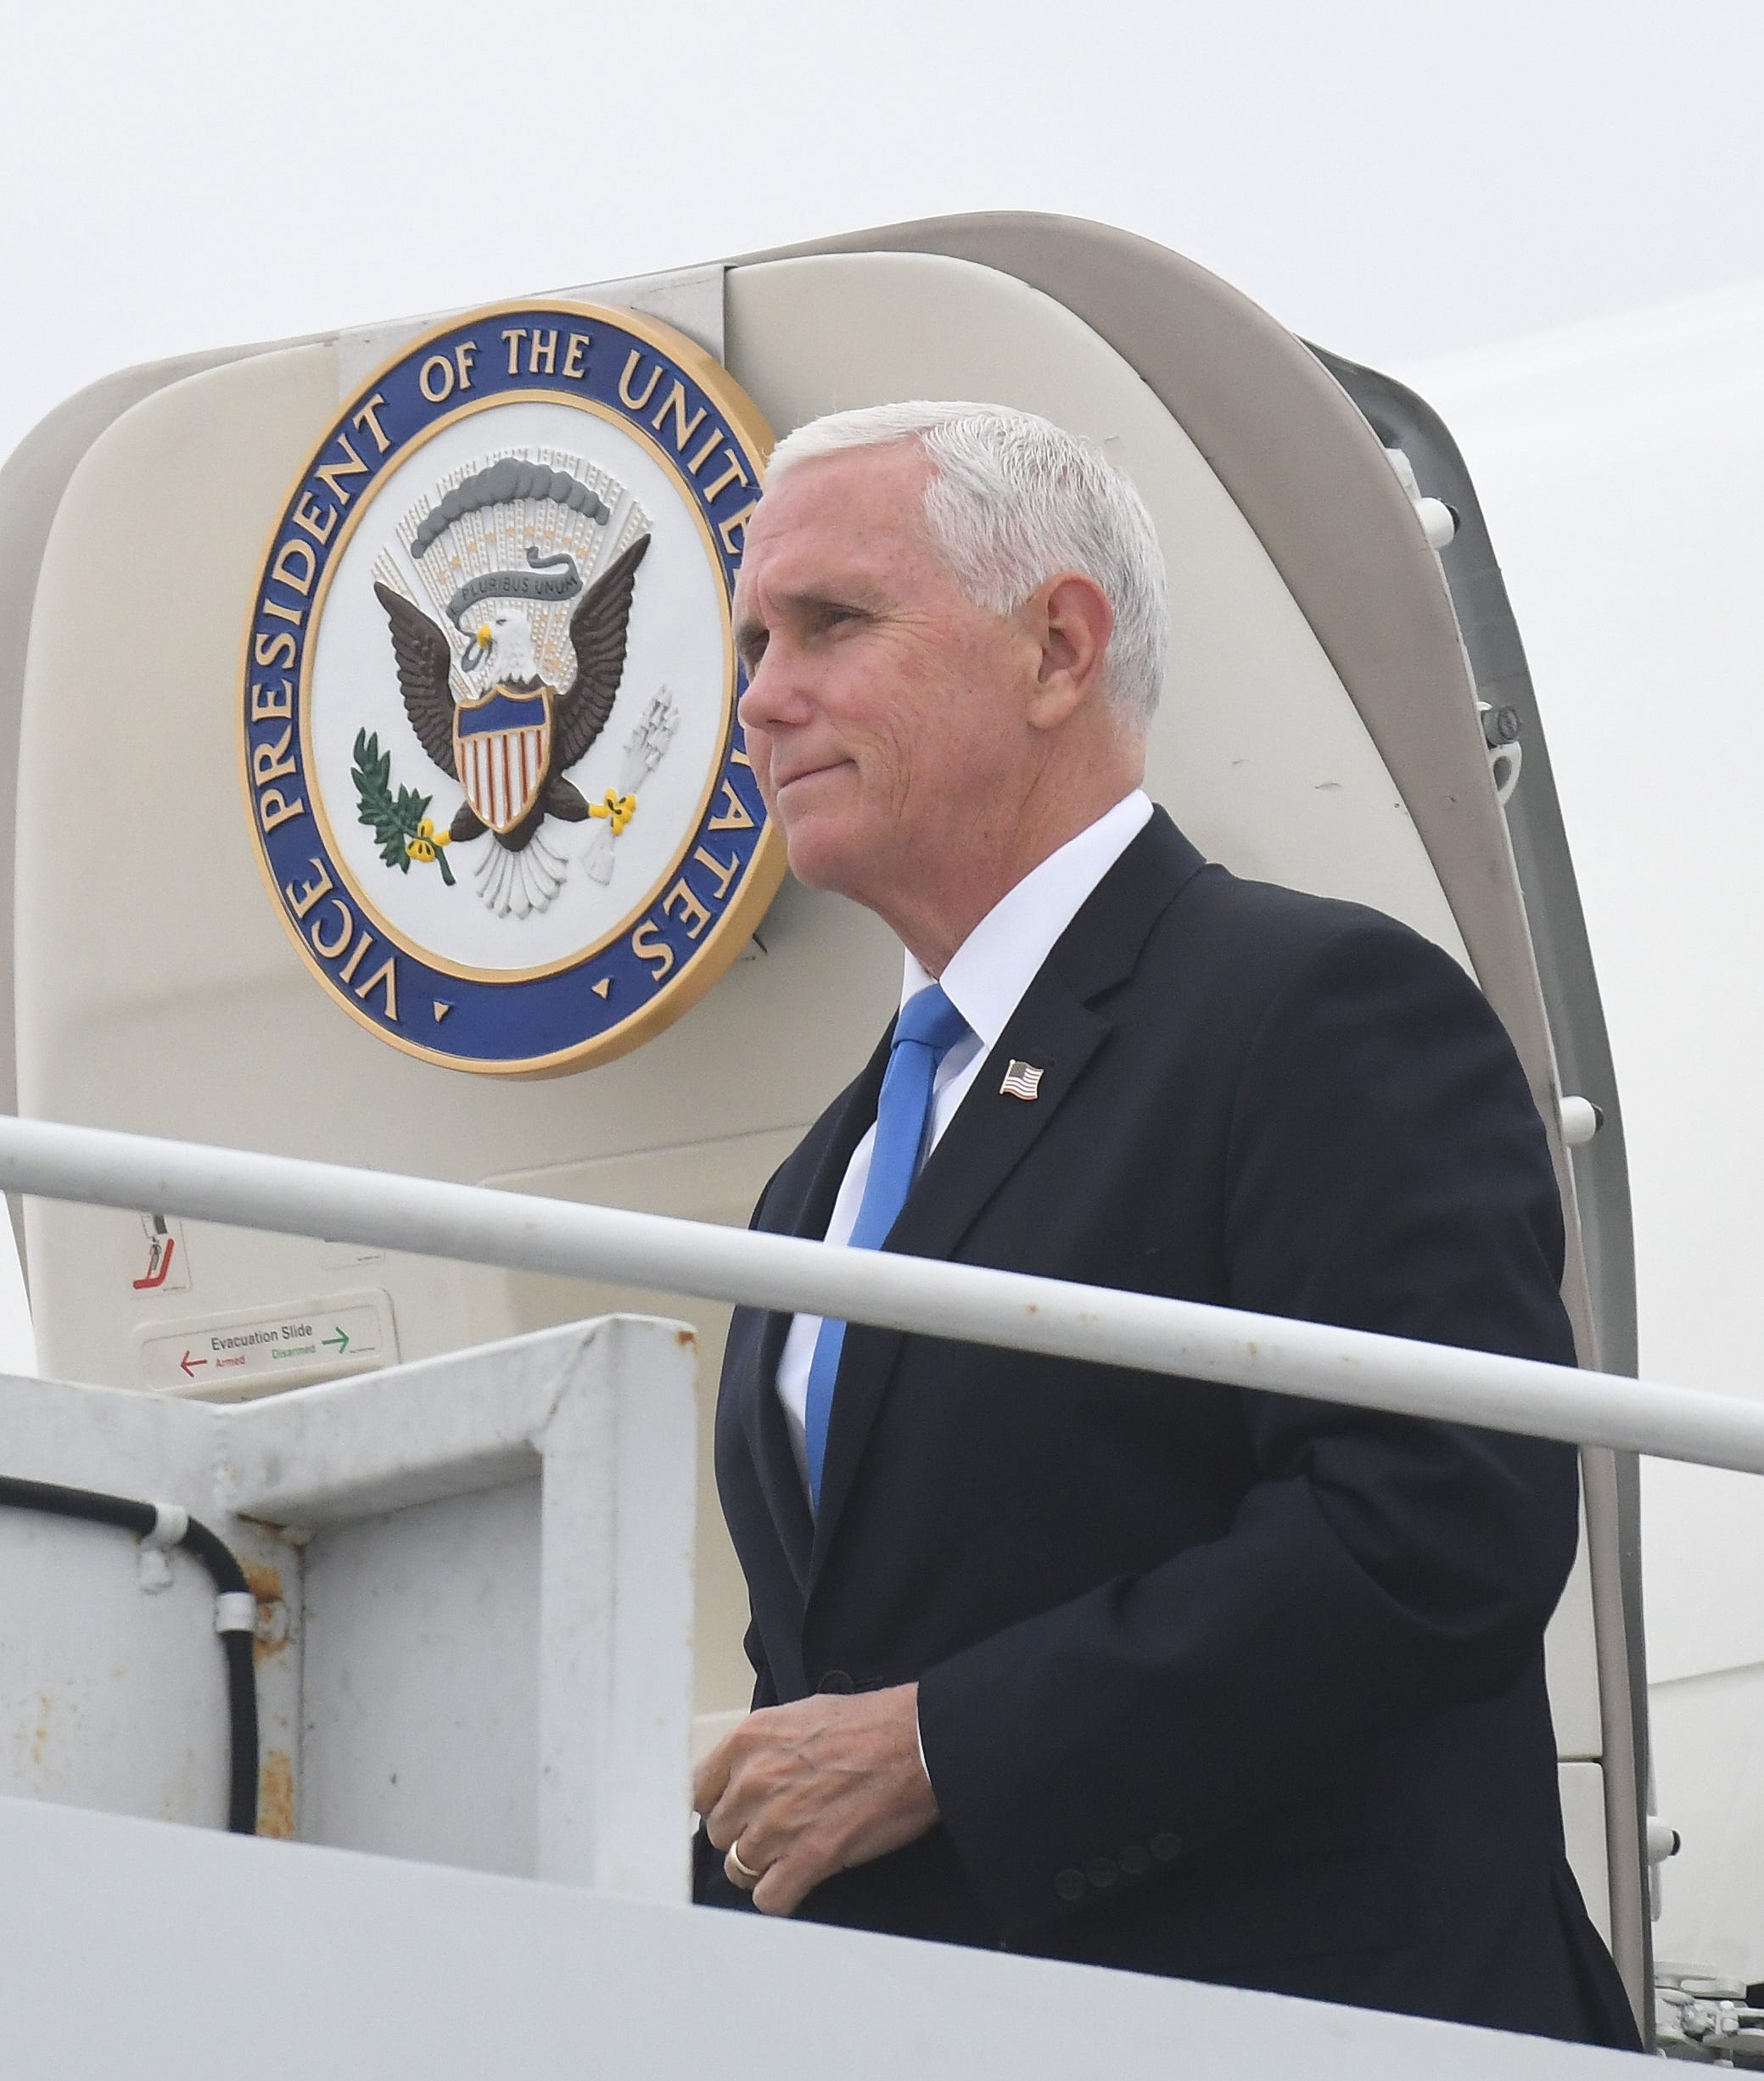 Vice President Mike Pence arrives in Air Force 2 for a campaign stop in Grand Rapids, Michigan on October 14, 2020.